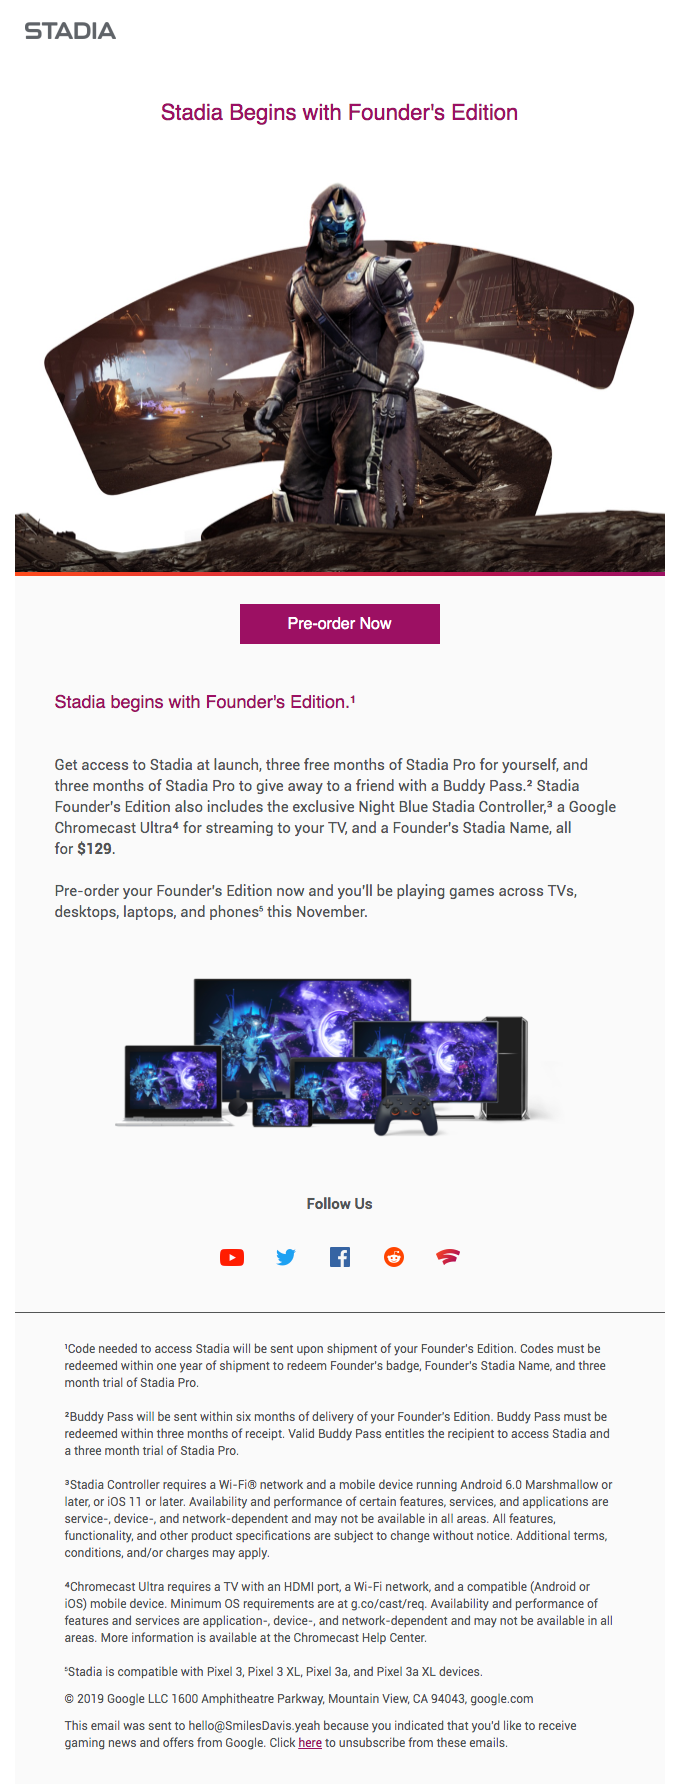 Stadia Begins with Founder's Edition